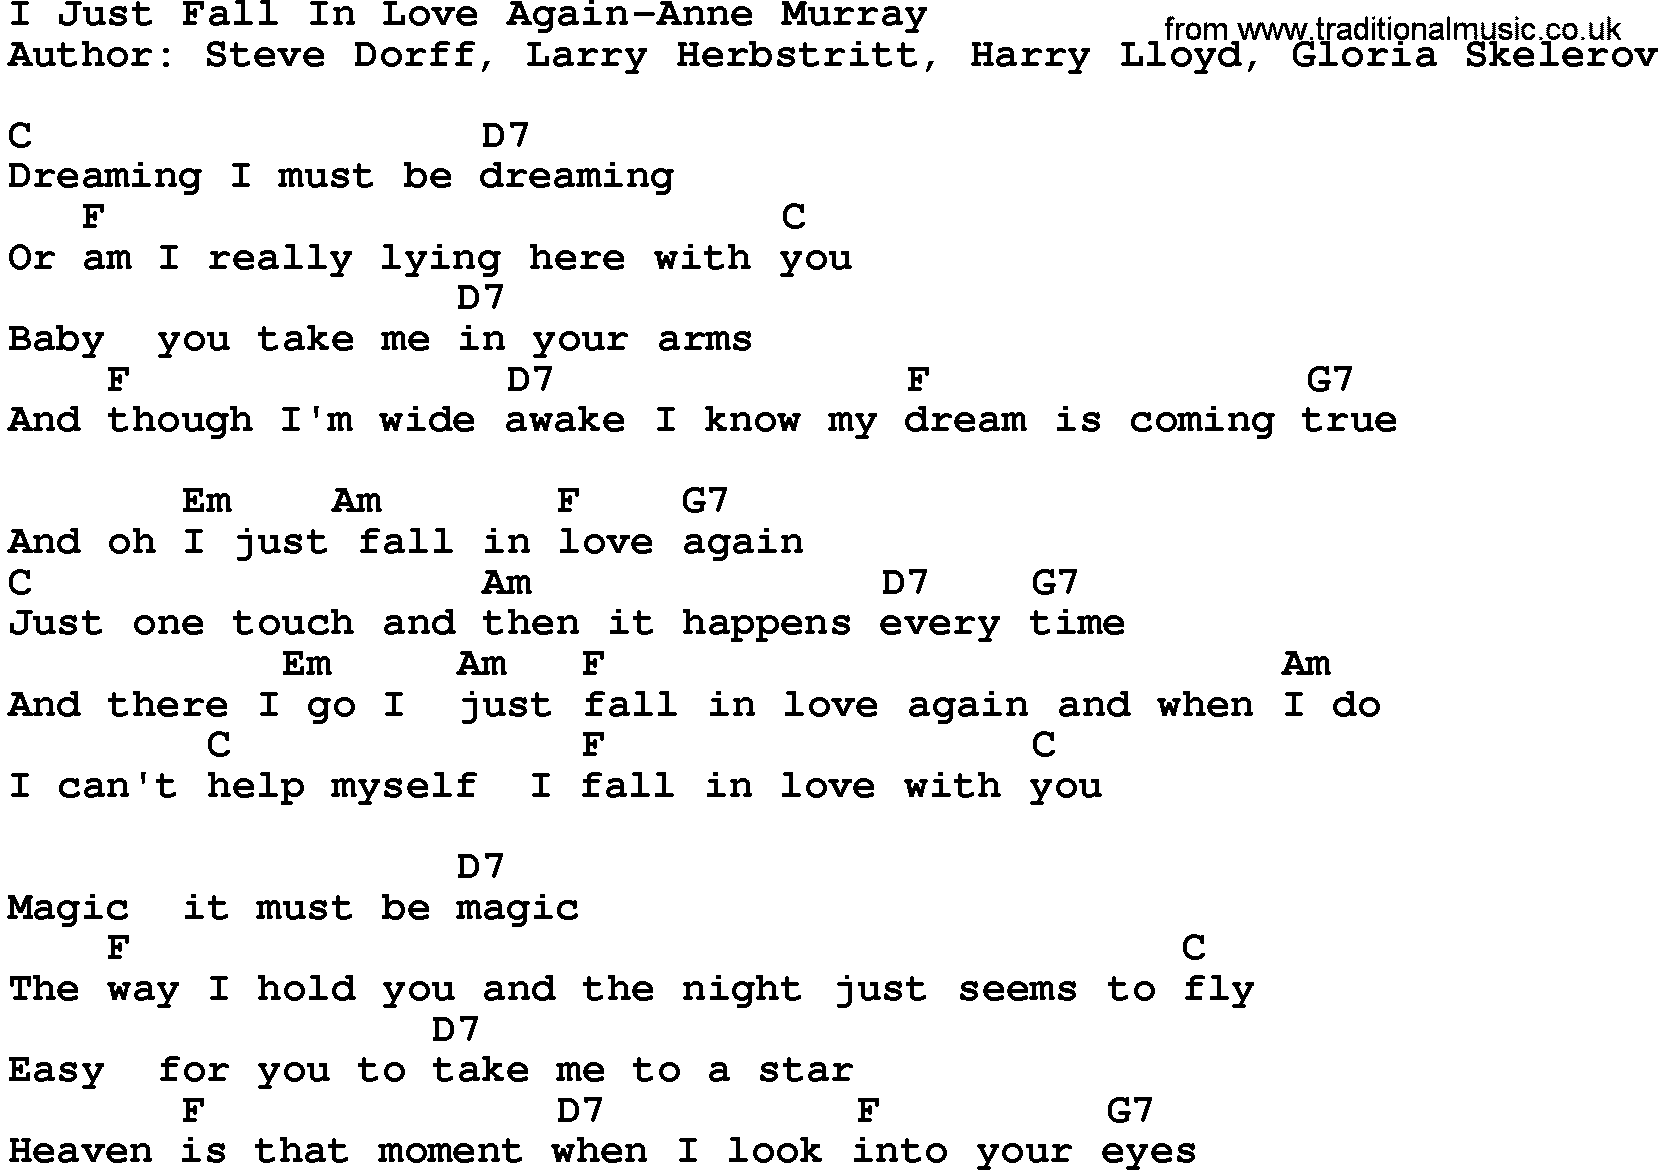 Country music song: I Just Fall In Love Again-Anne Murray lyrics and chords